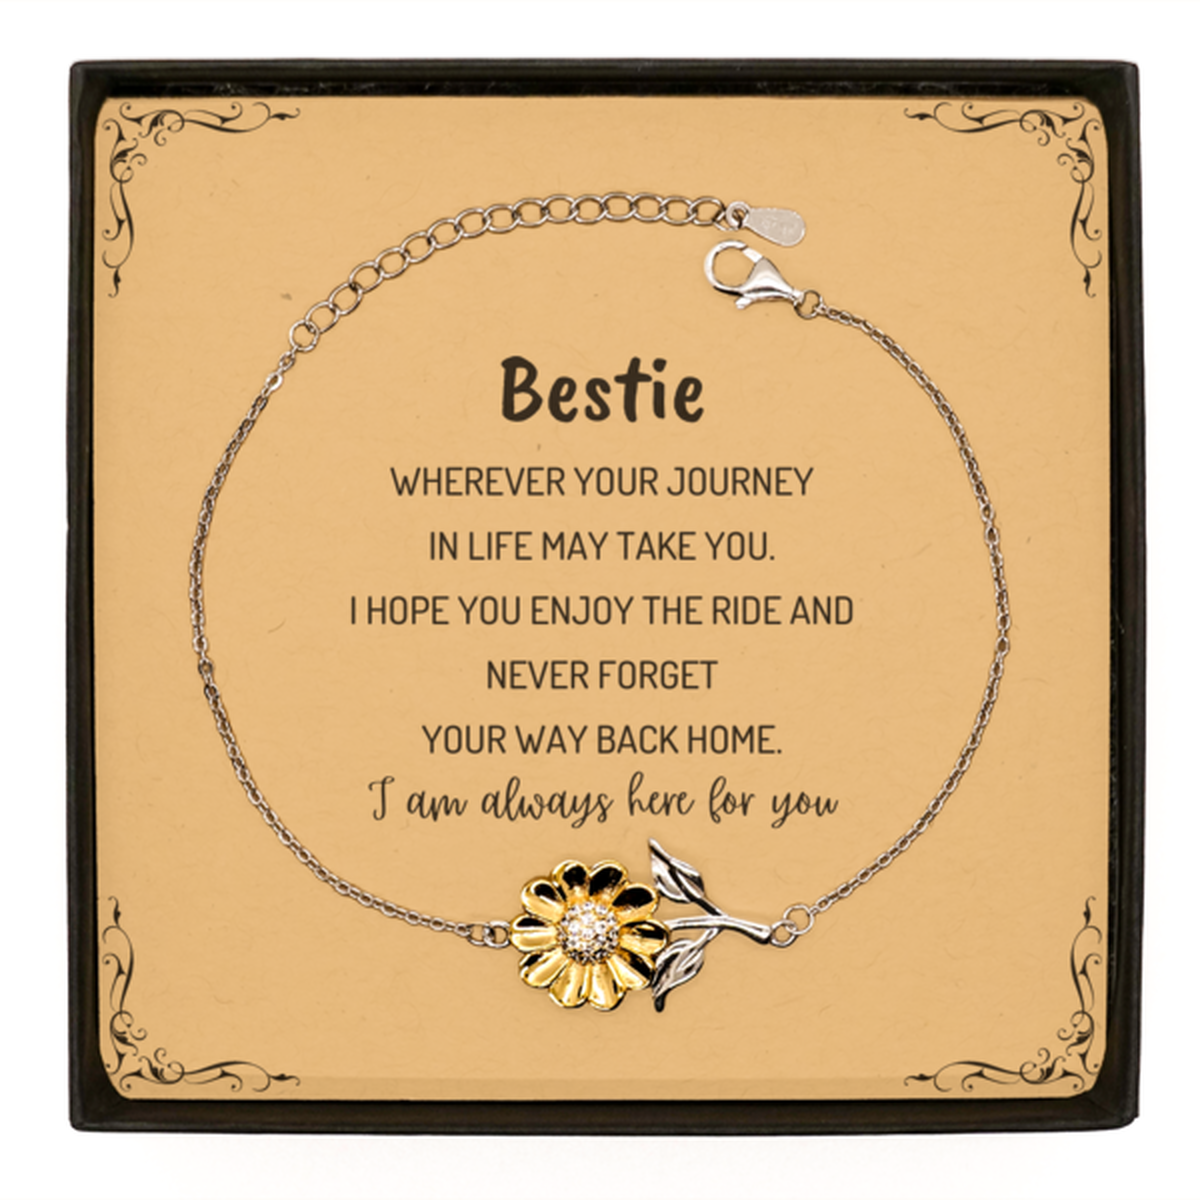 Bestie wherever your journey in life may take you, I am always here for you Bestie Sunflower Bracelet, Awesome Christmas Gifts For Bestie Message Card, Bestie Birthday Gifts for Men Women Family Loved One